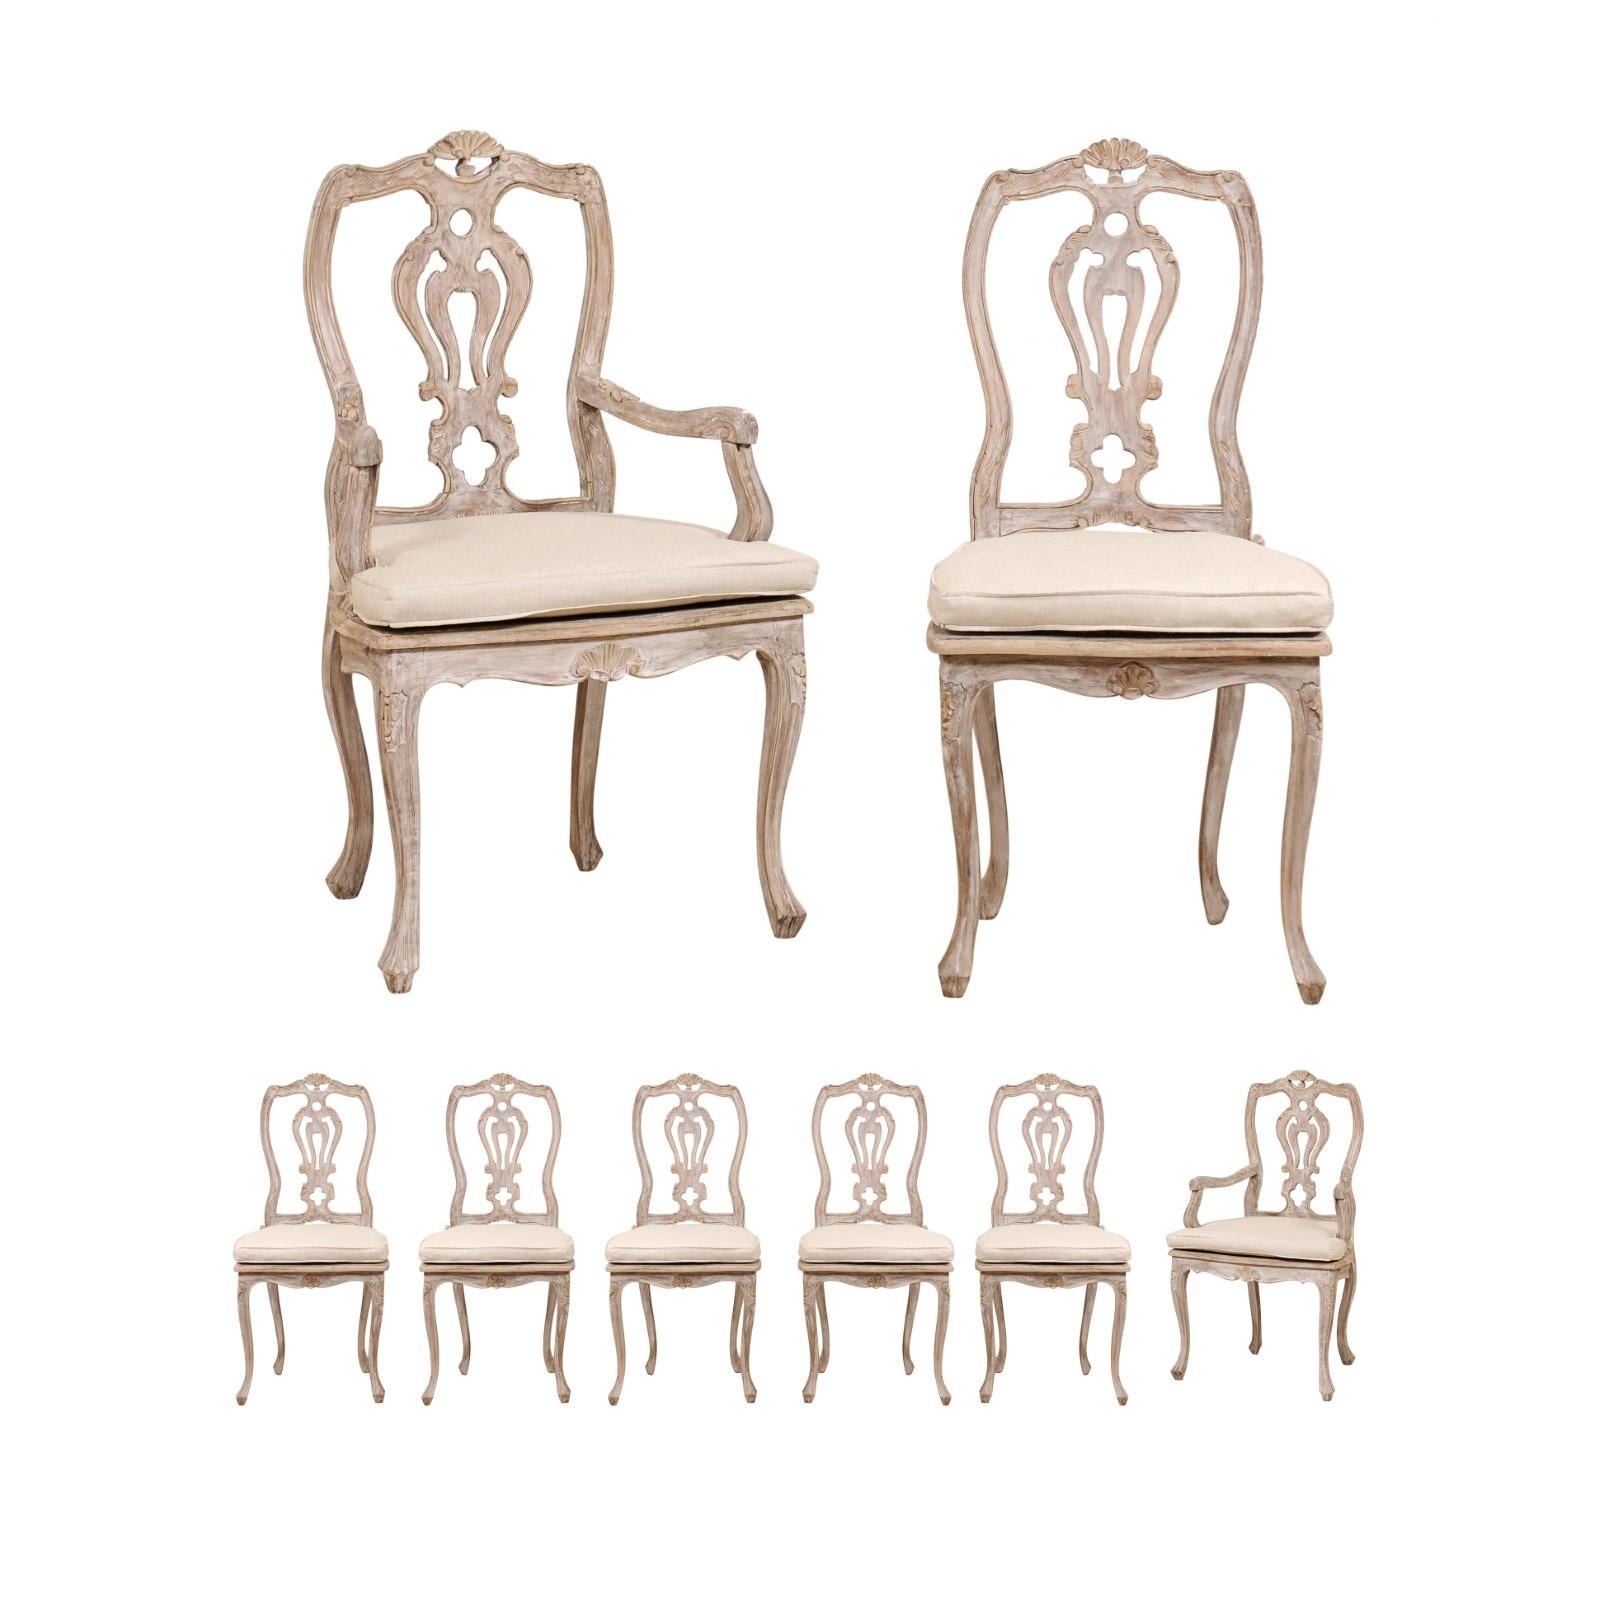 Set of Eight Lovely Italian Ornately Carved & Pierced-Splat Back Dining Chairs 